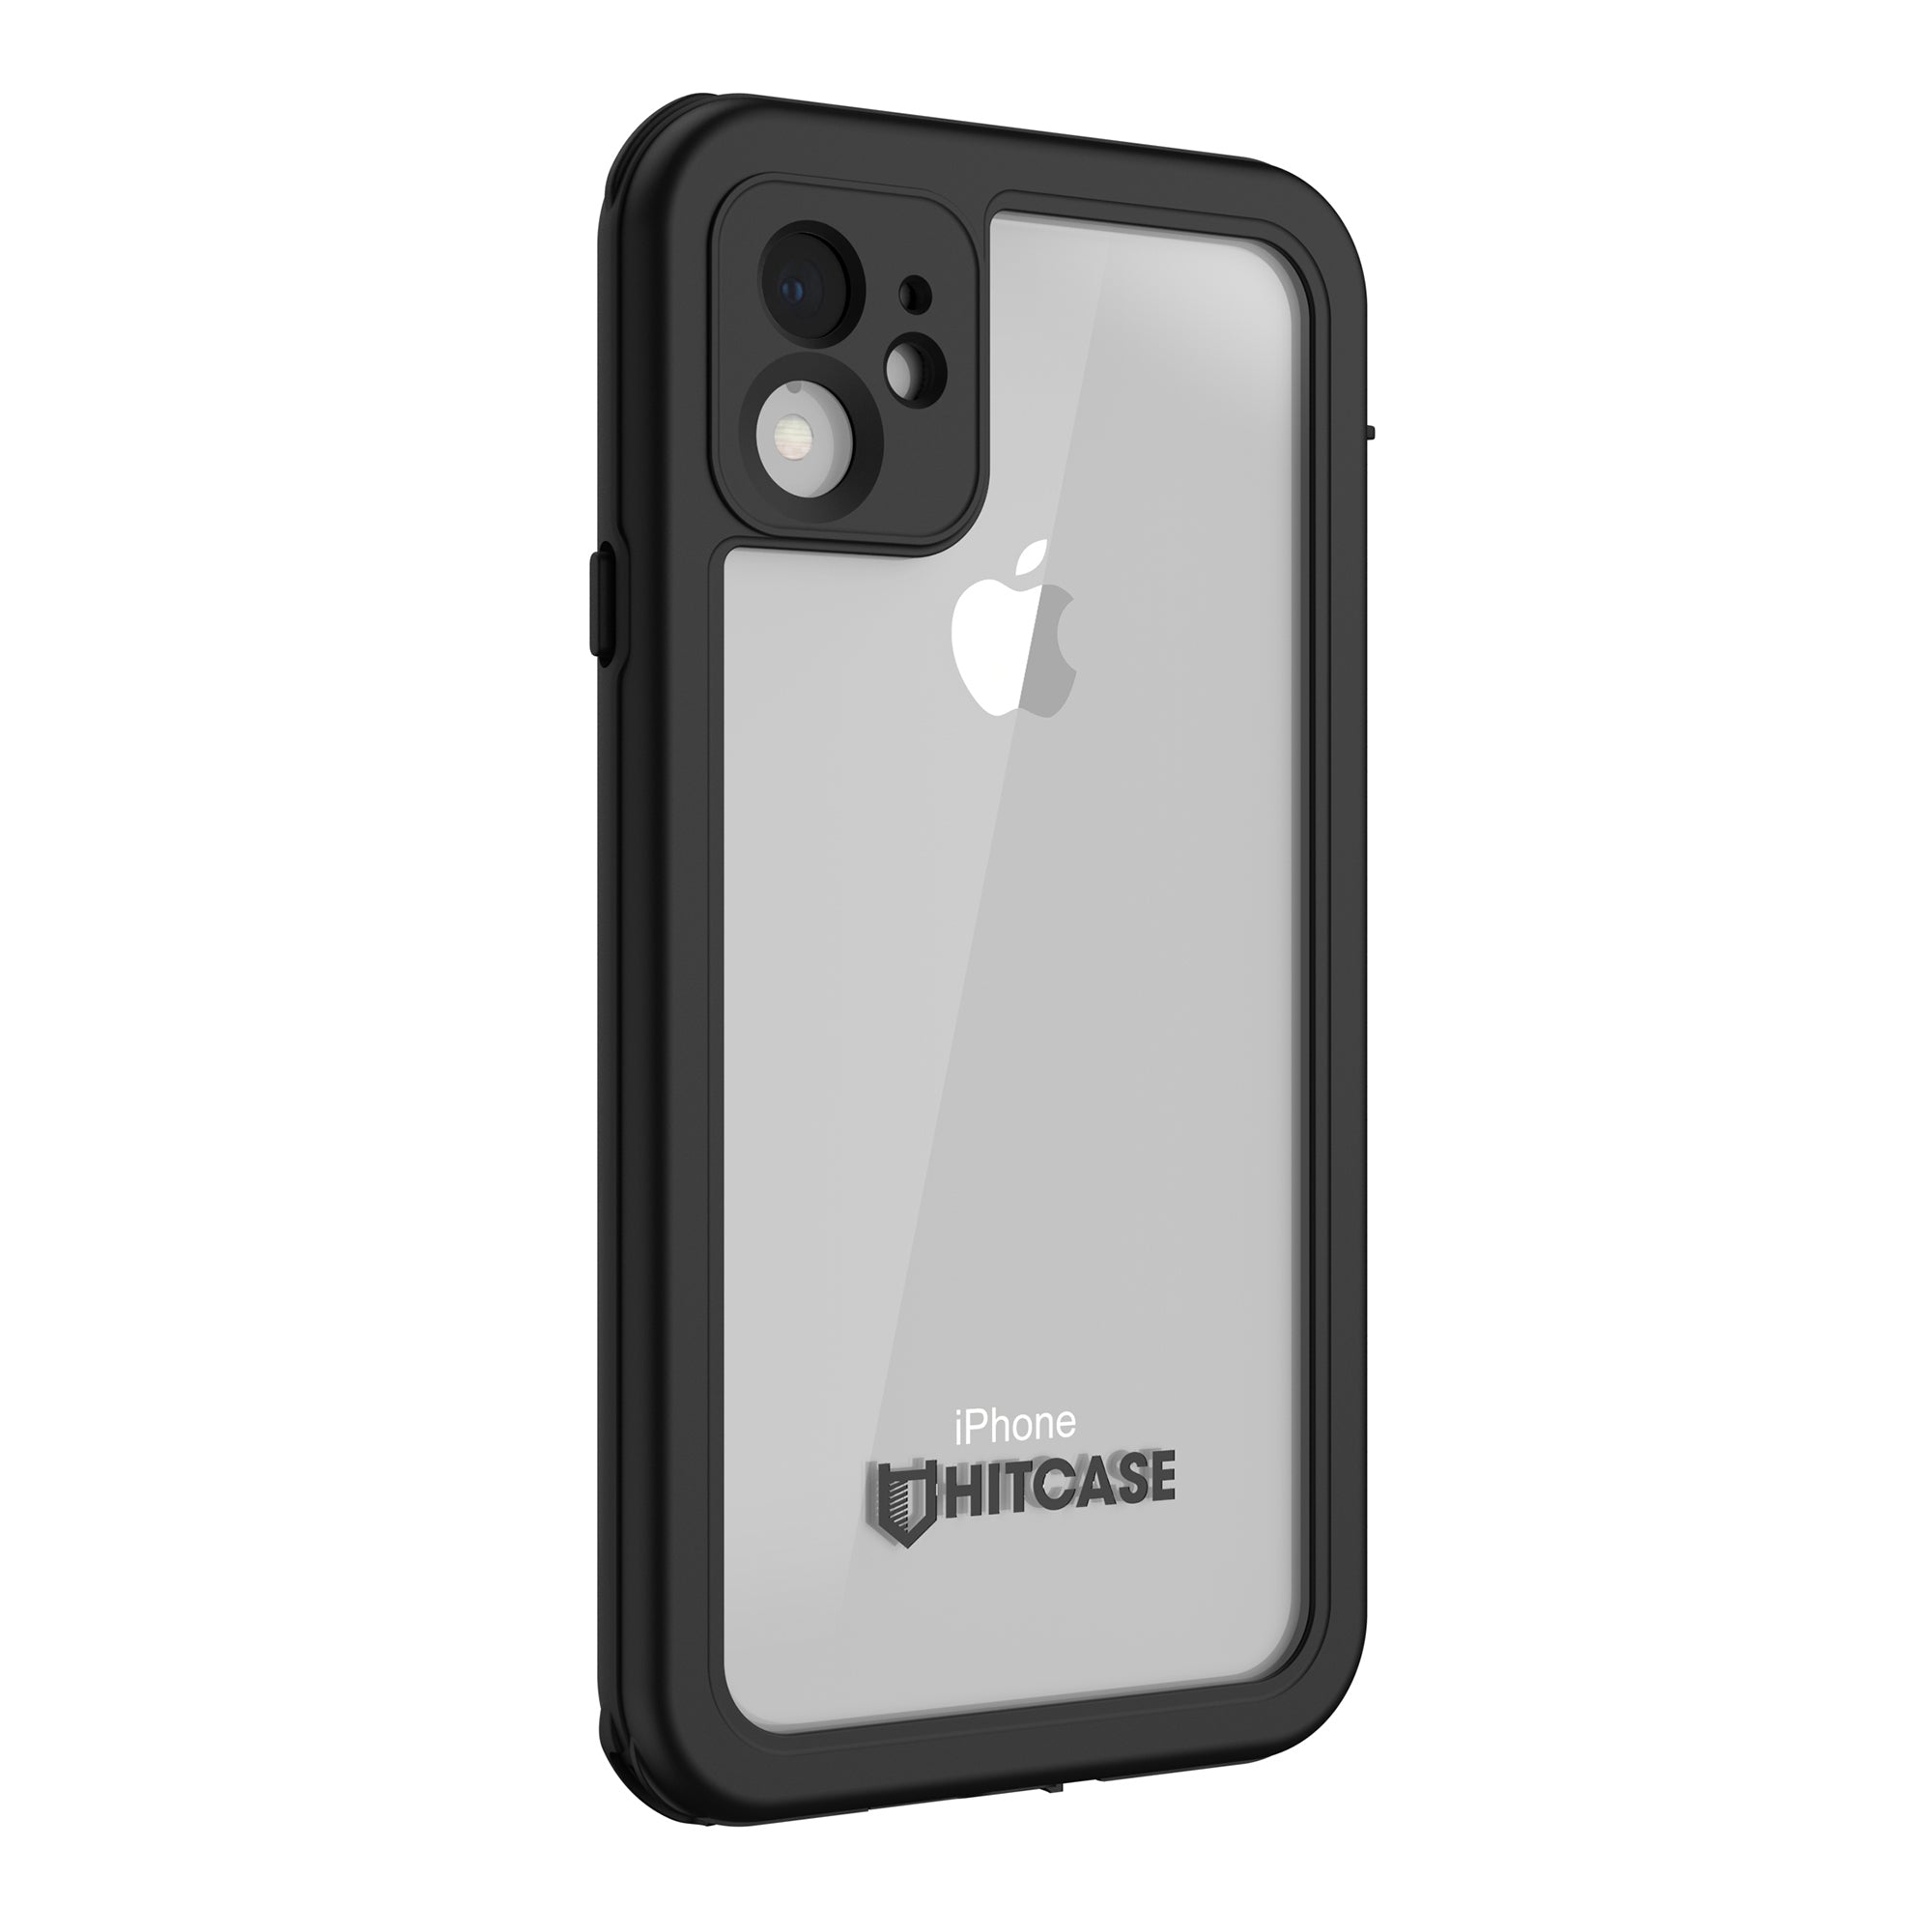 Catalyst Waterproof Case for iPhone XR - Stealth Black